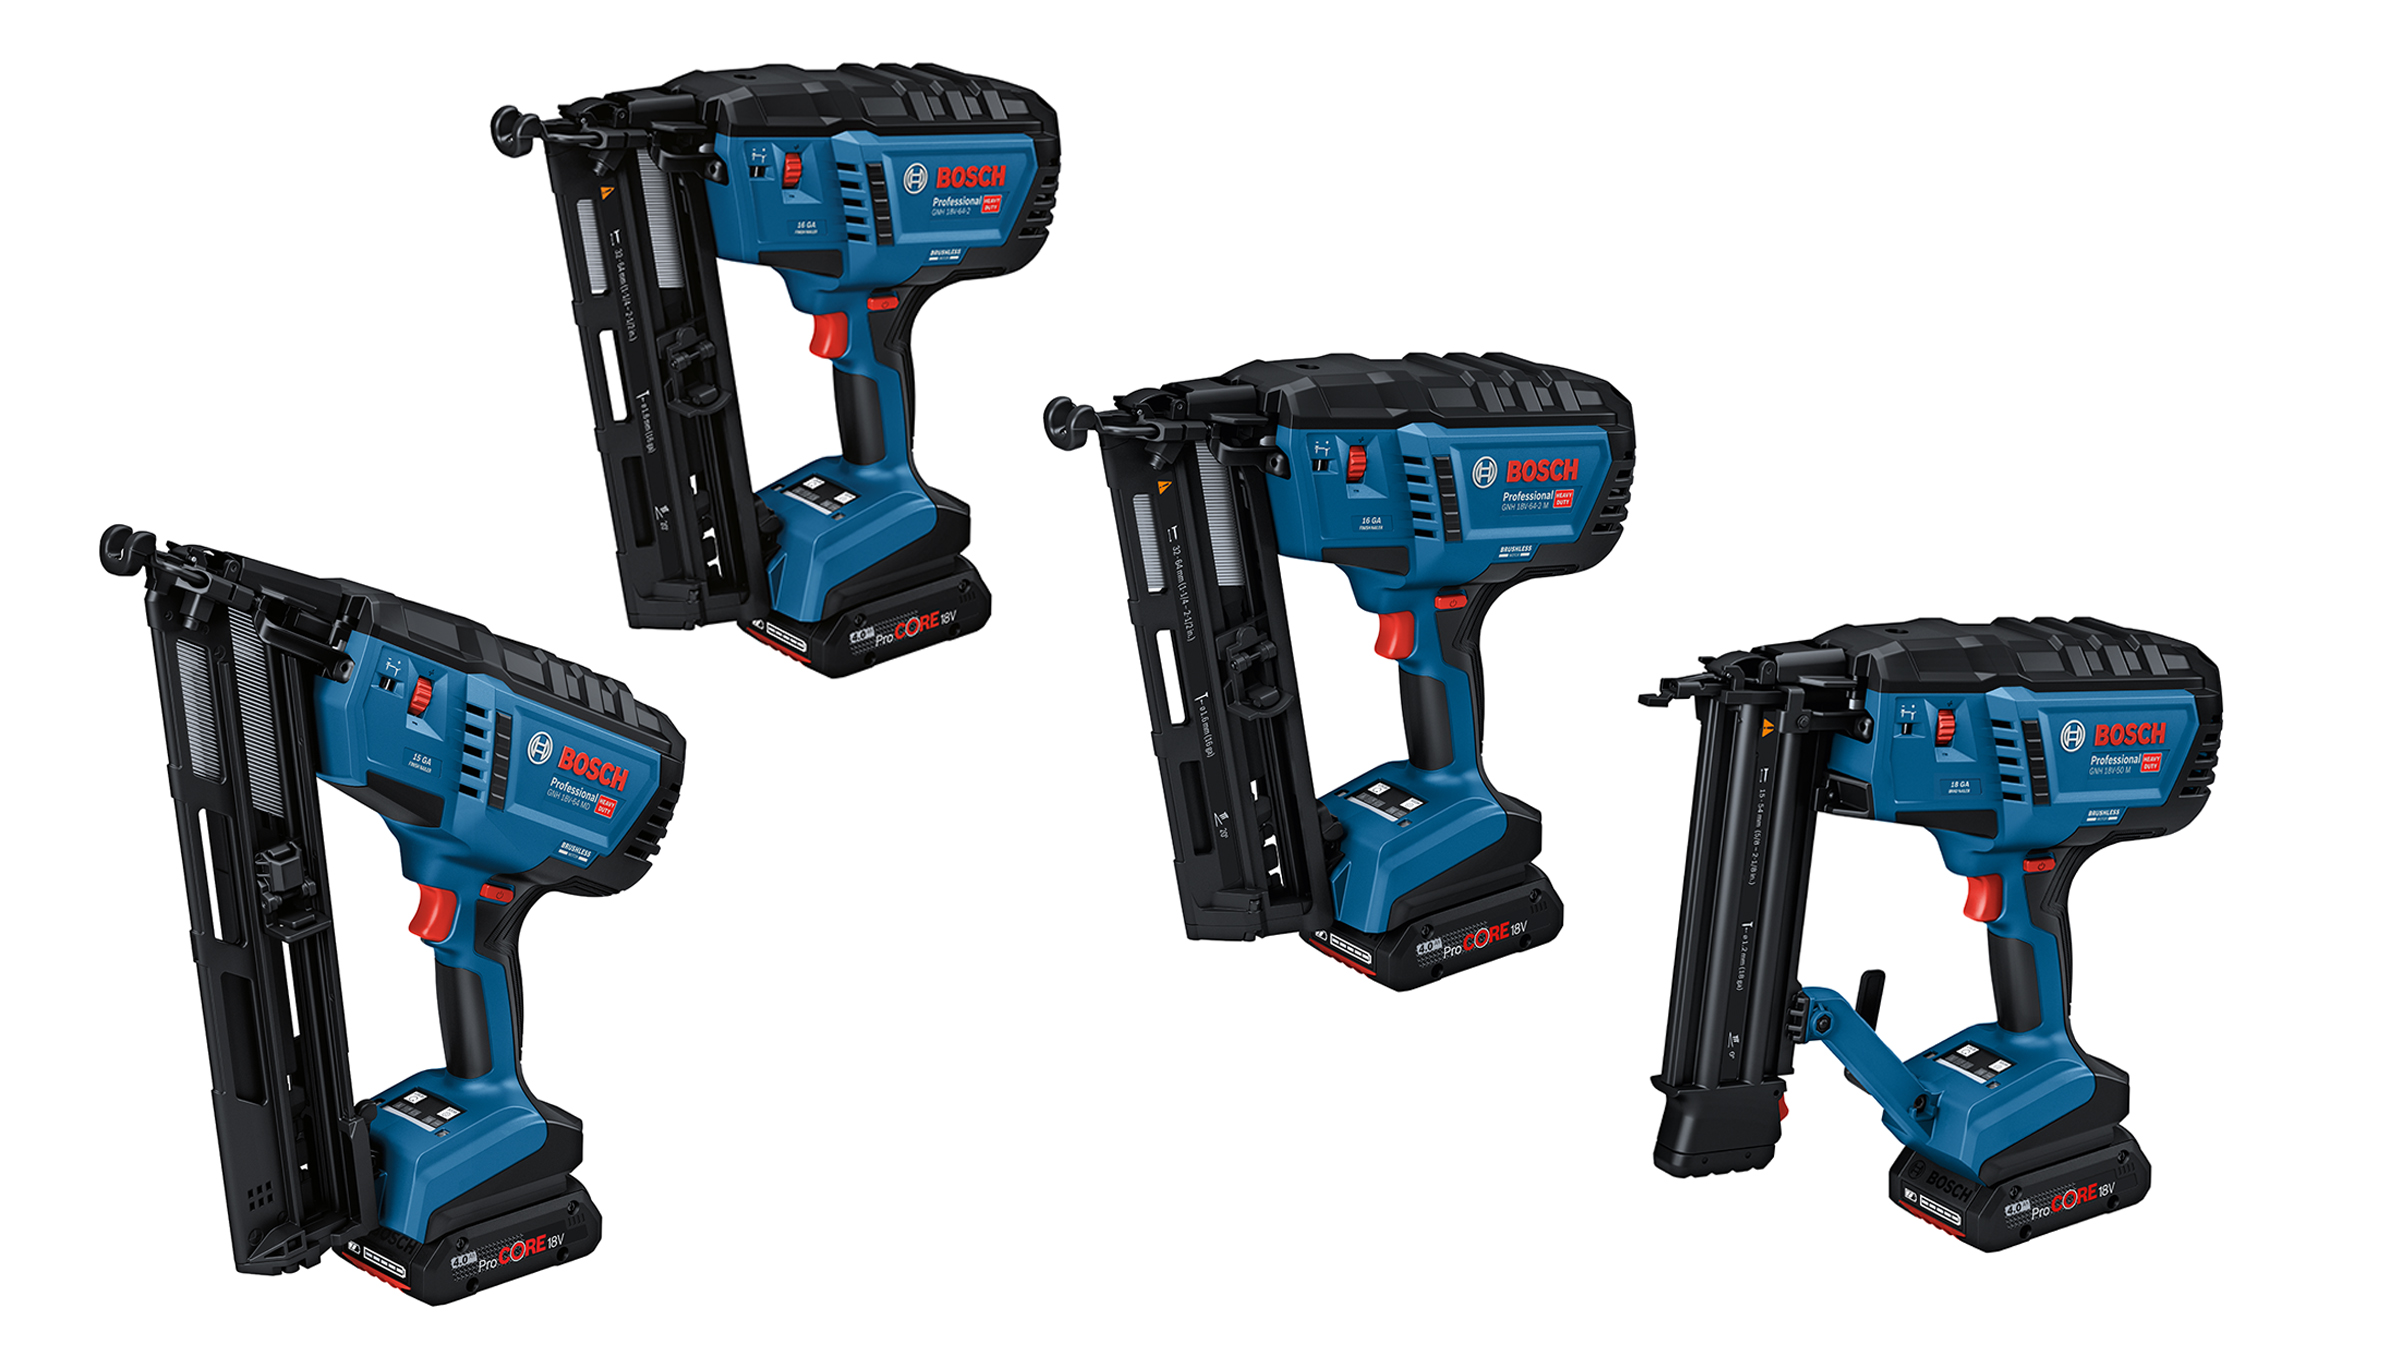 Simple and precise fastening for interior finishing: Bosch cordless nail guns and cordless stapler for pros